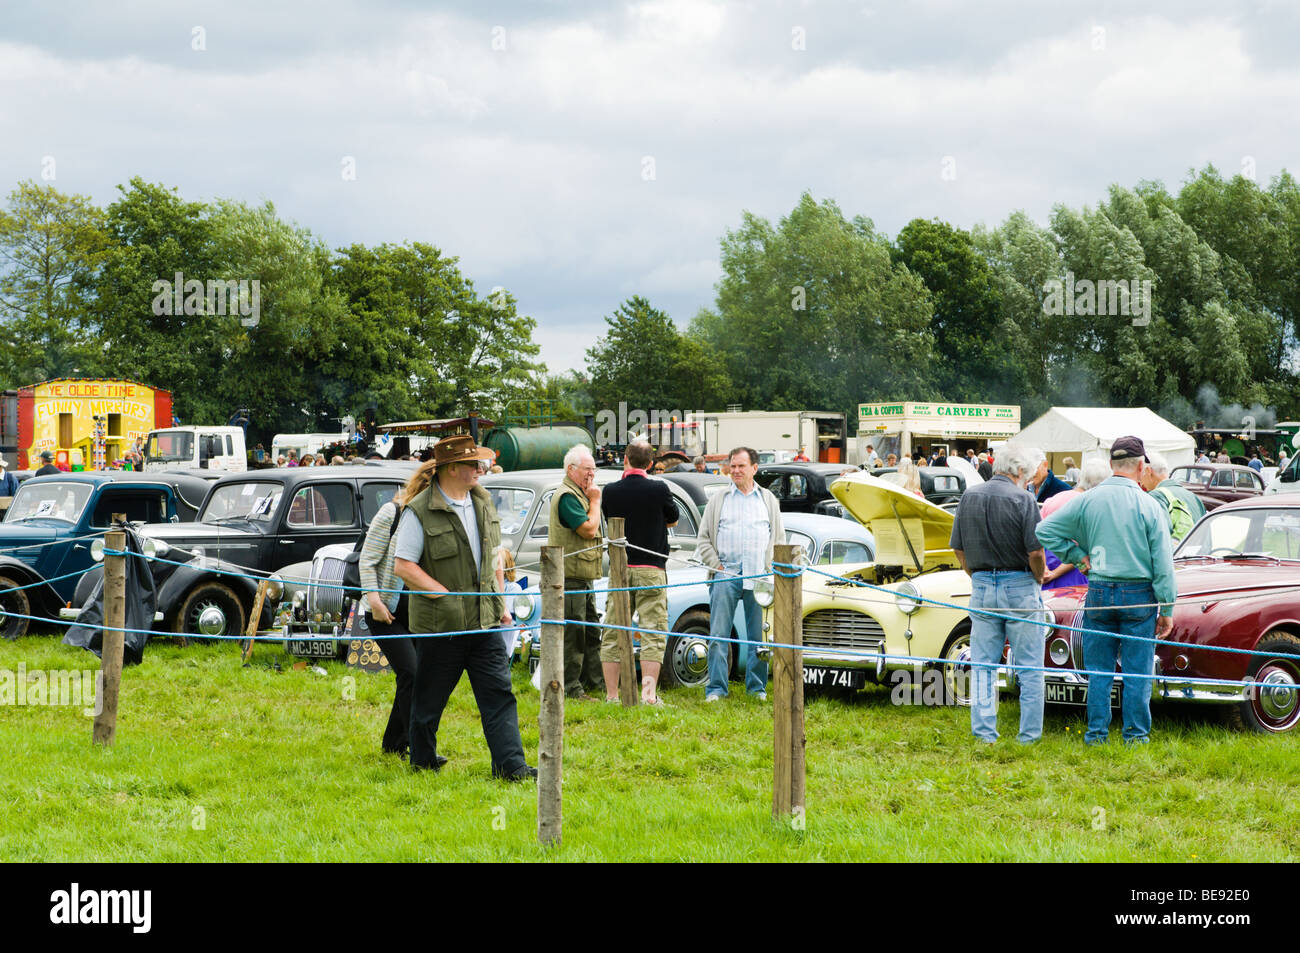 People admiring classic cars at a country festival Stock Photo